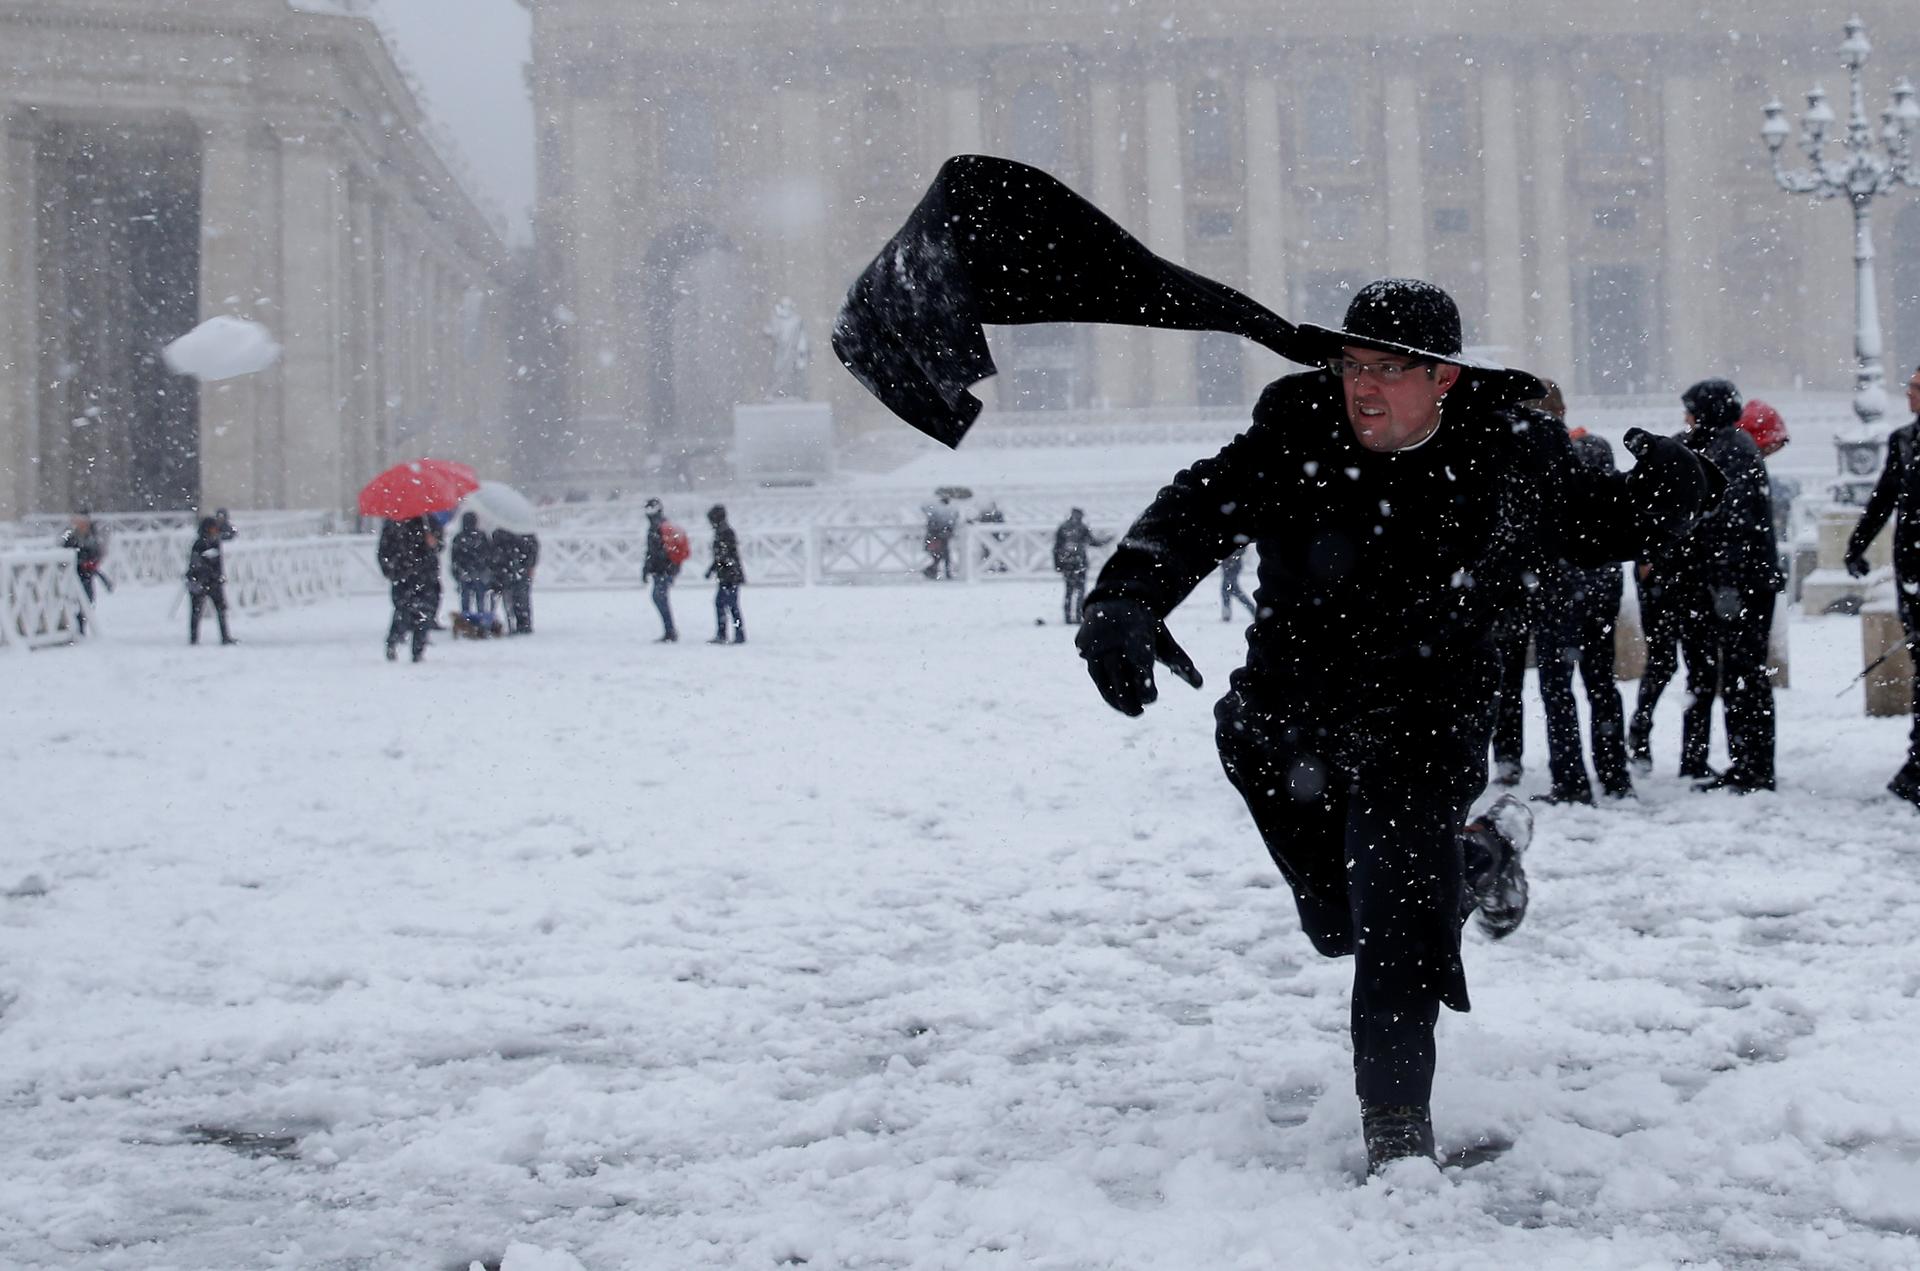 A priest plays with snow during a heavy snowfall in Saint Peter's Square at the Vatican on February 26.